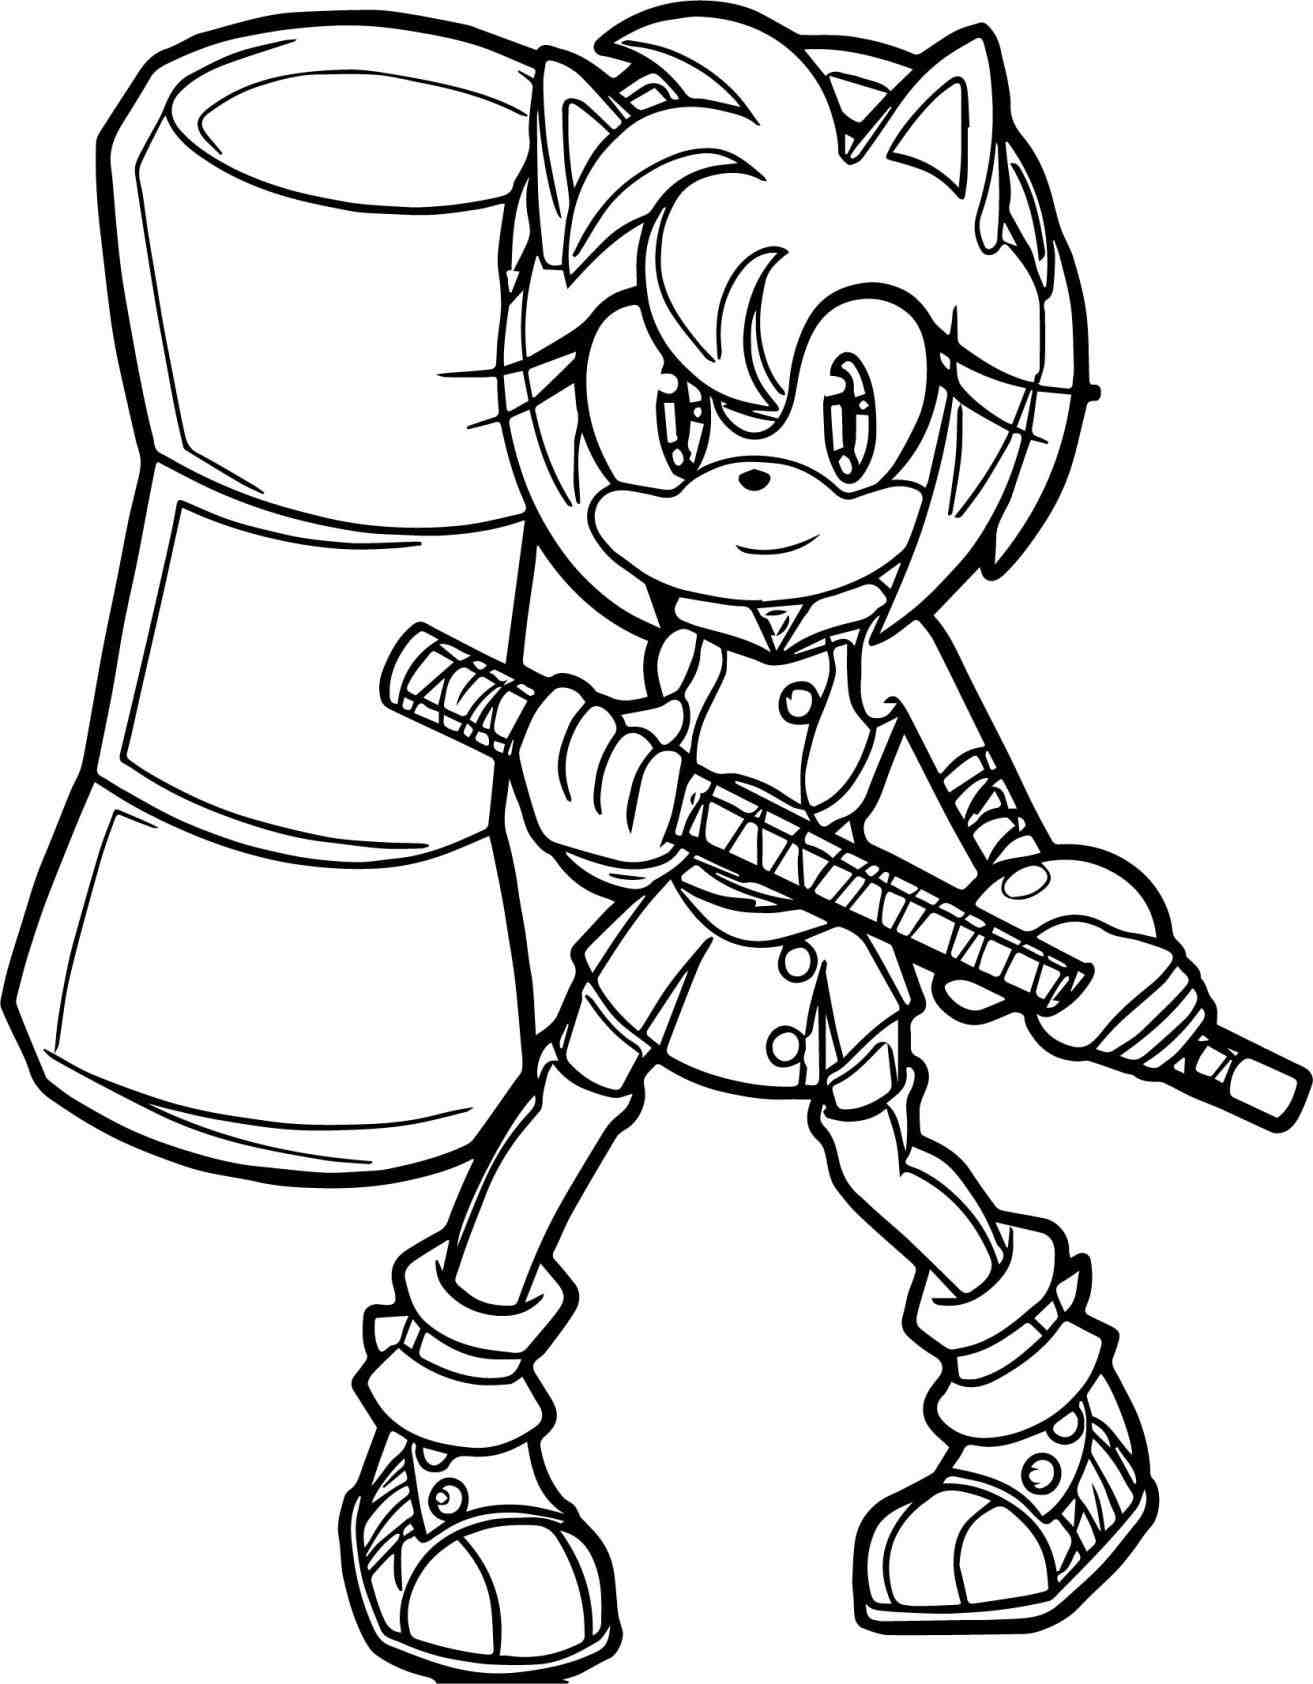 Amy Sonic Coloring Pages at GetDrawings | Free download